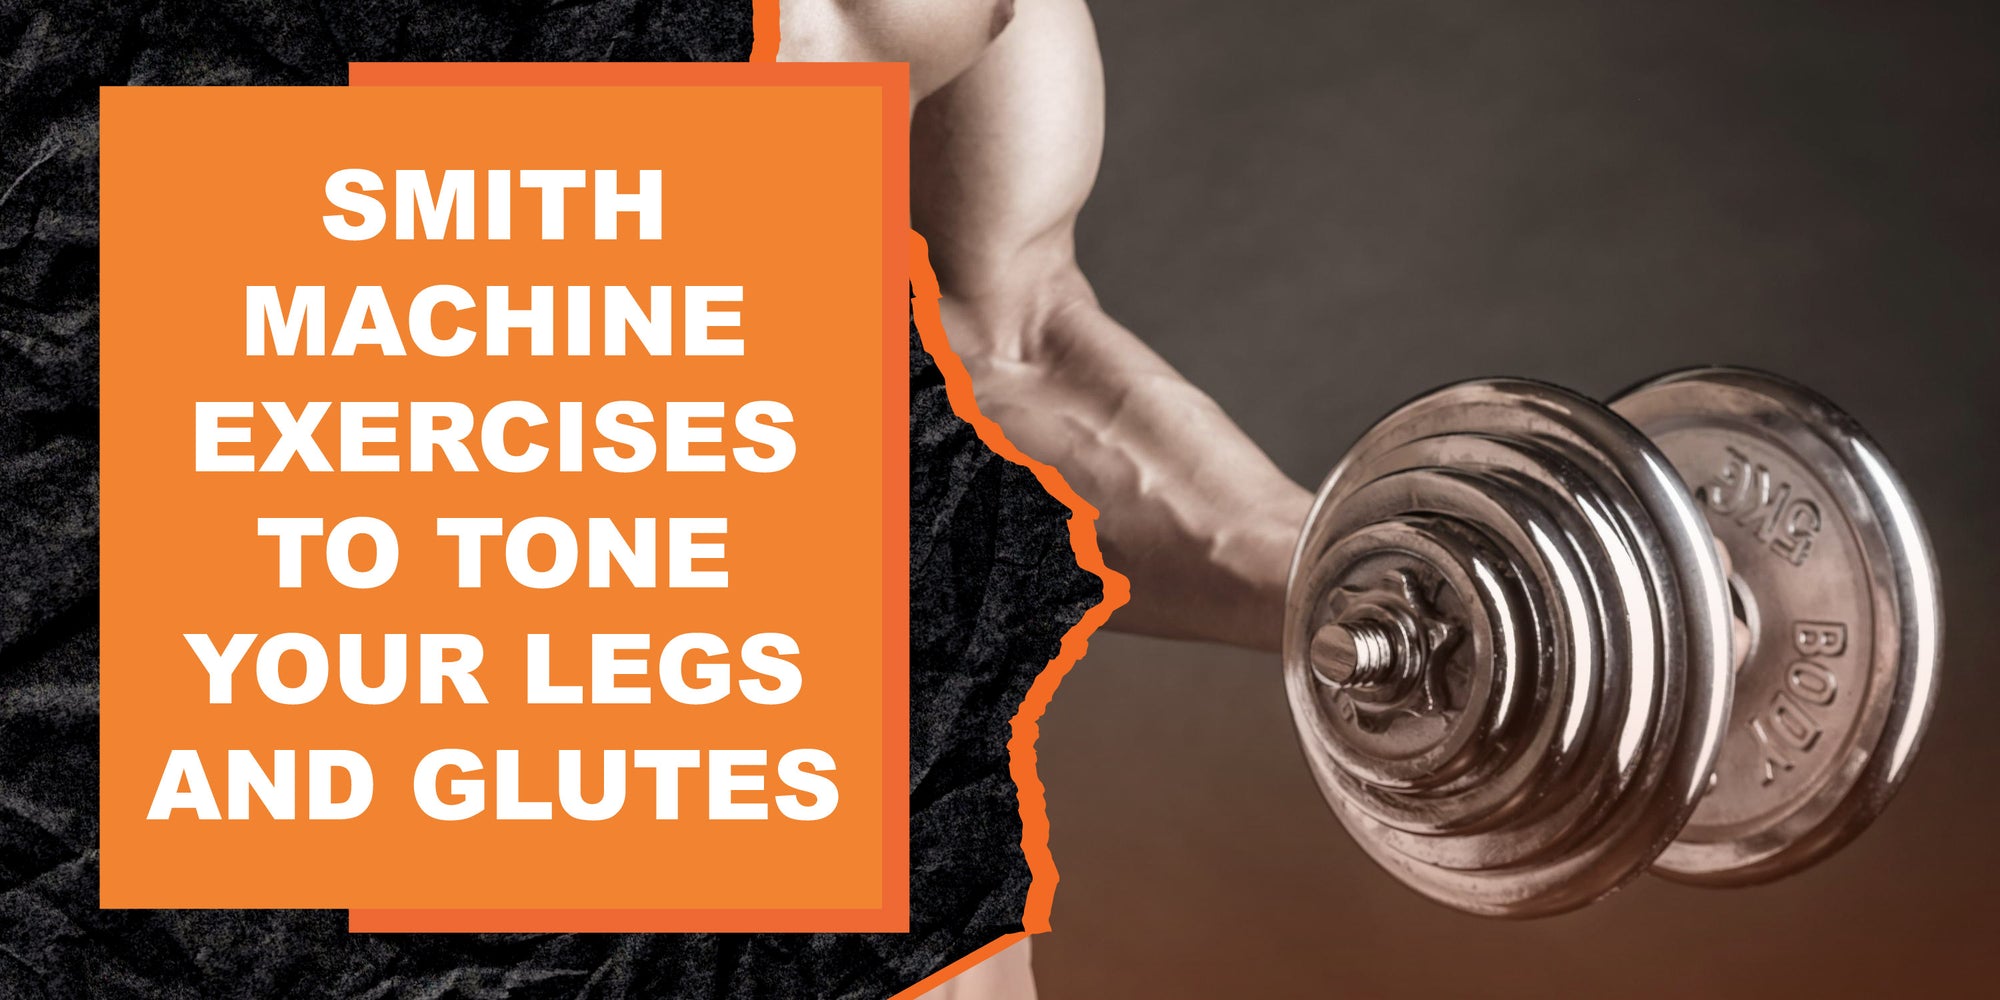 Smith Machine Exercises to Tone Your Legs and Glutes